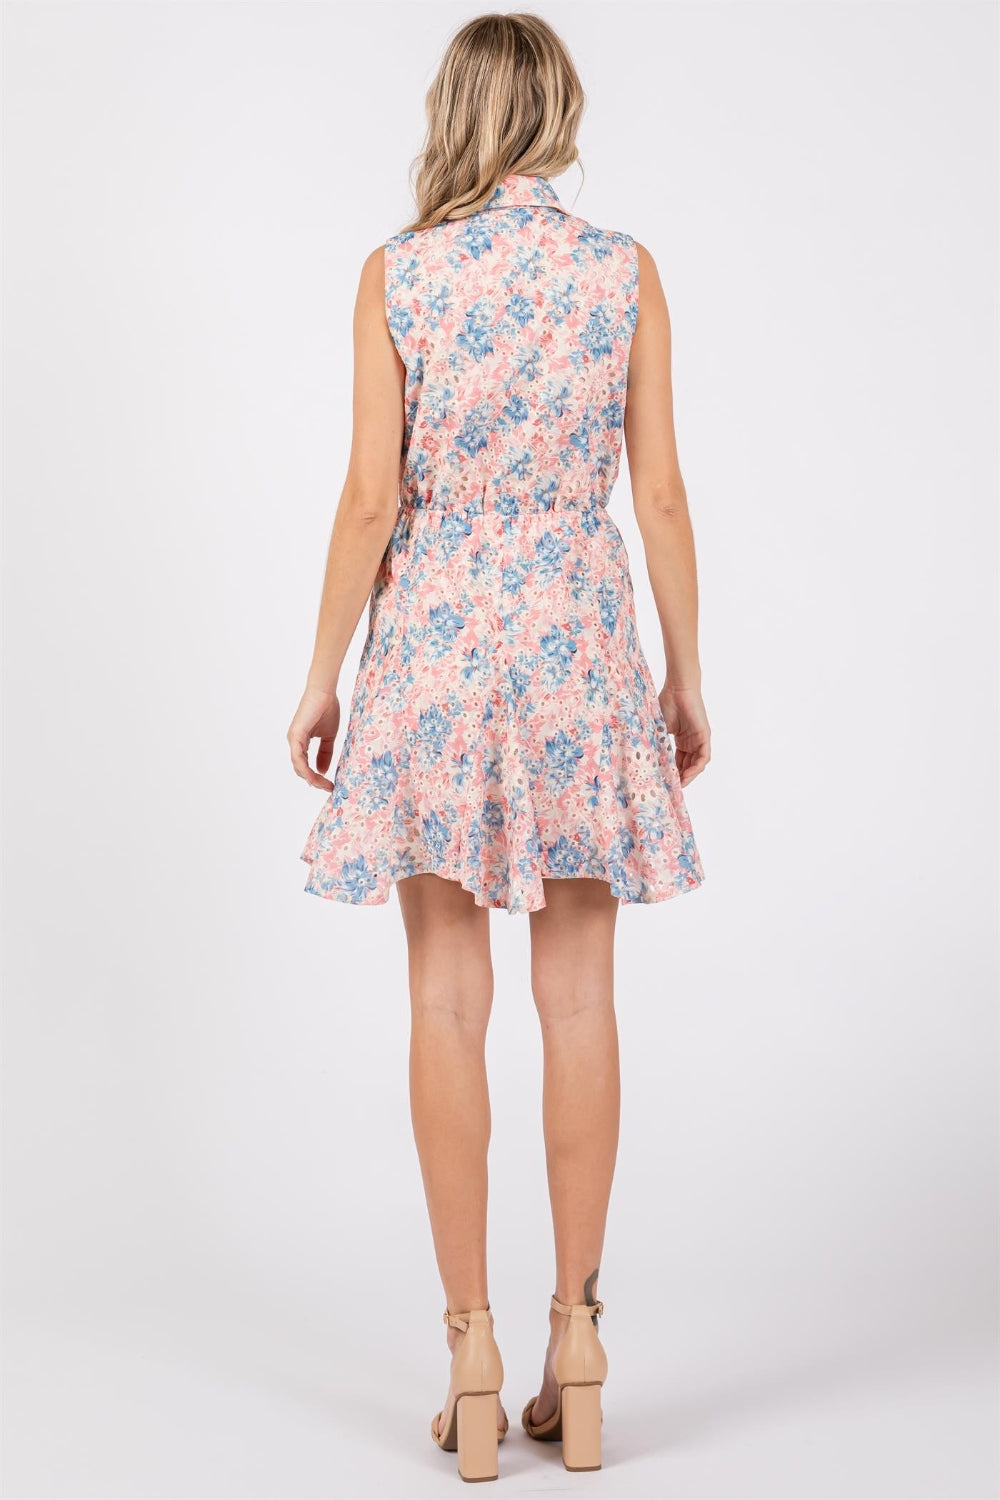 Blue Zone Planet |  GeeGee Full Size Floral Eyelet Sleeveless Mini Dress BLUE ZONE PLANET